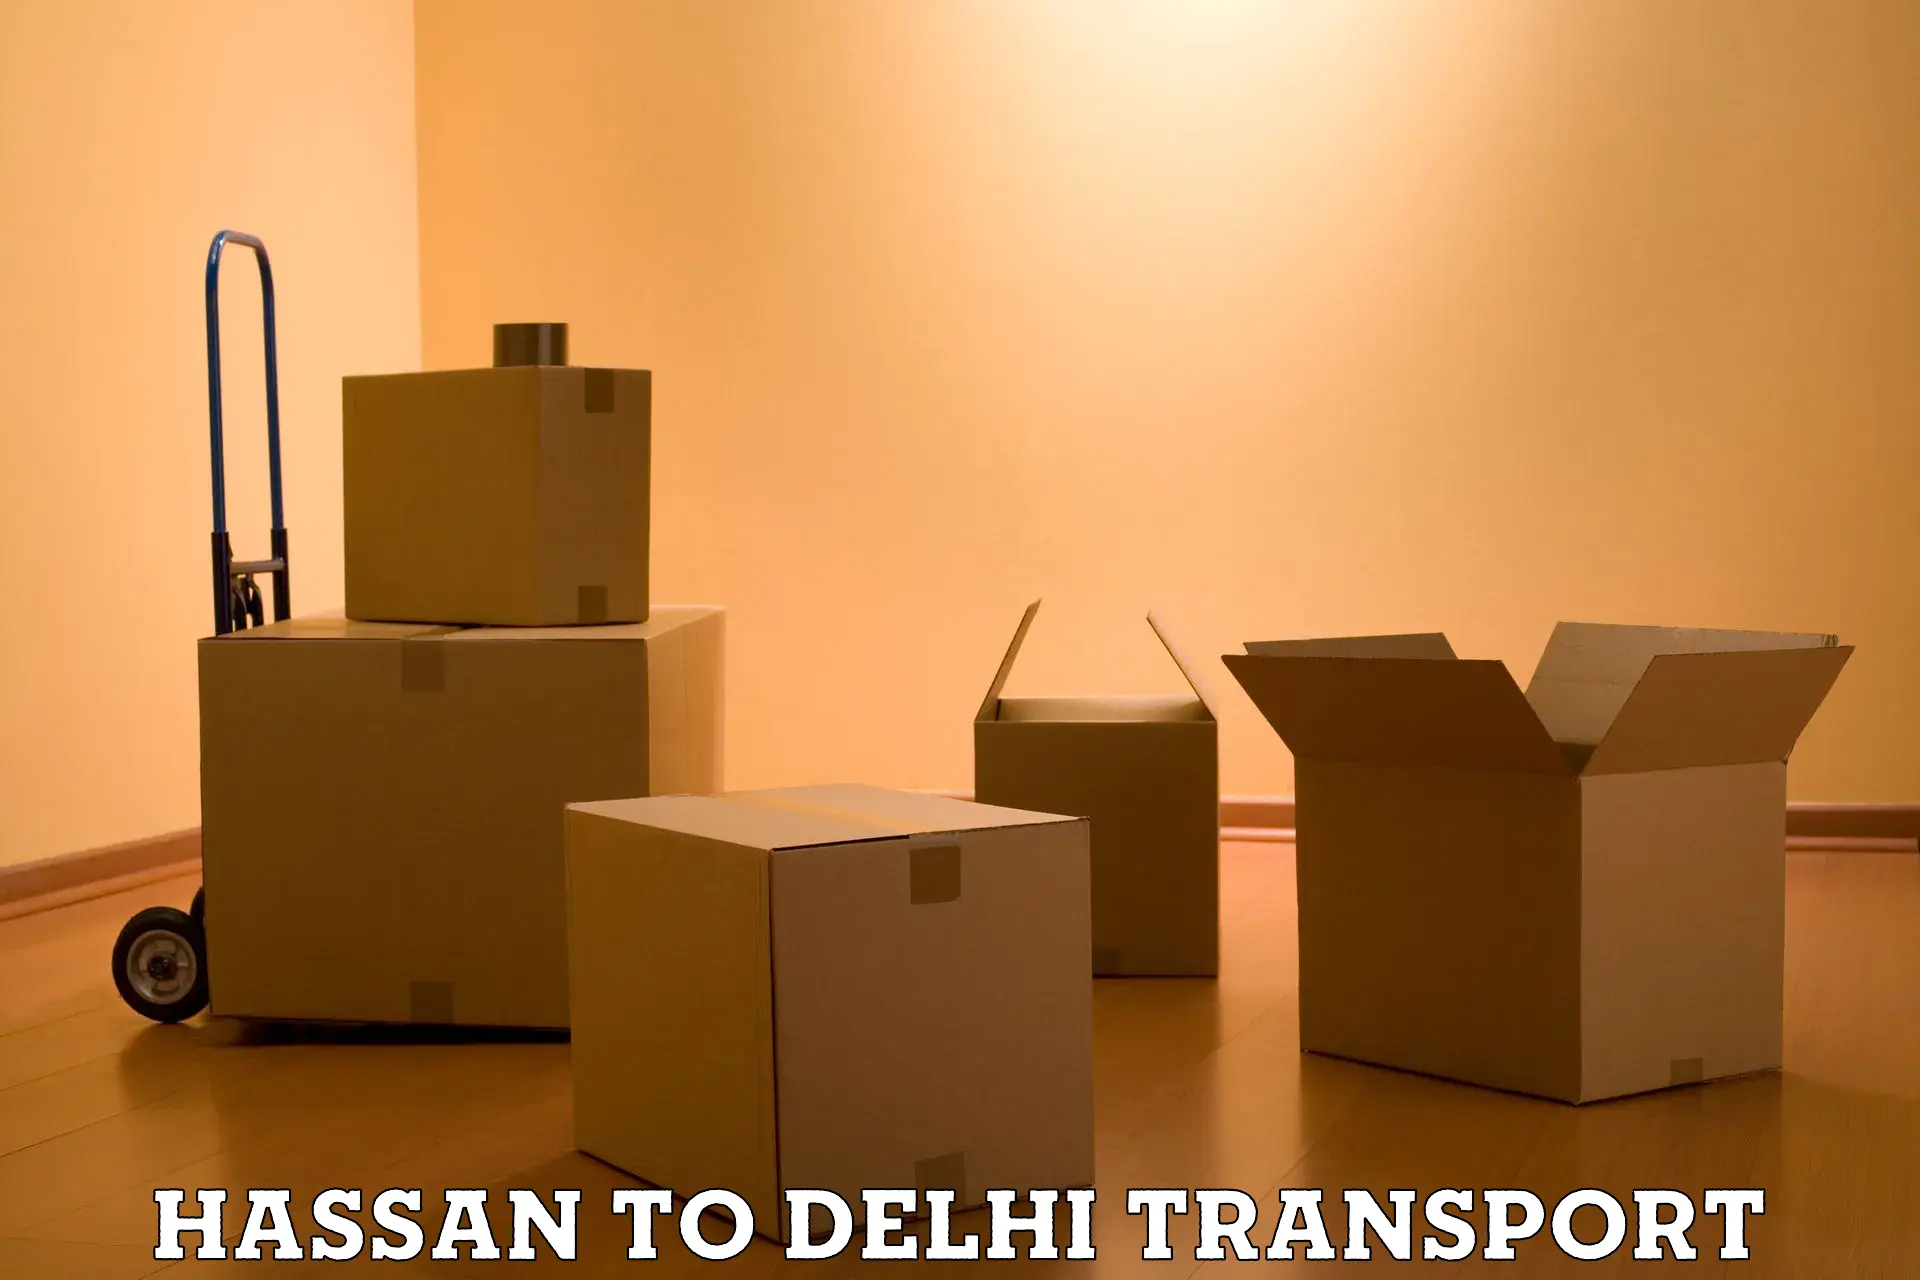 Nearby transport service Hassan to NCR